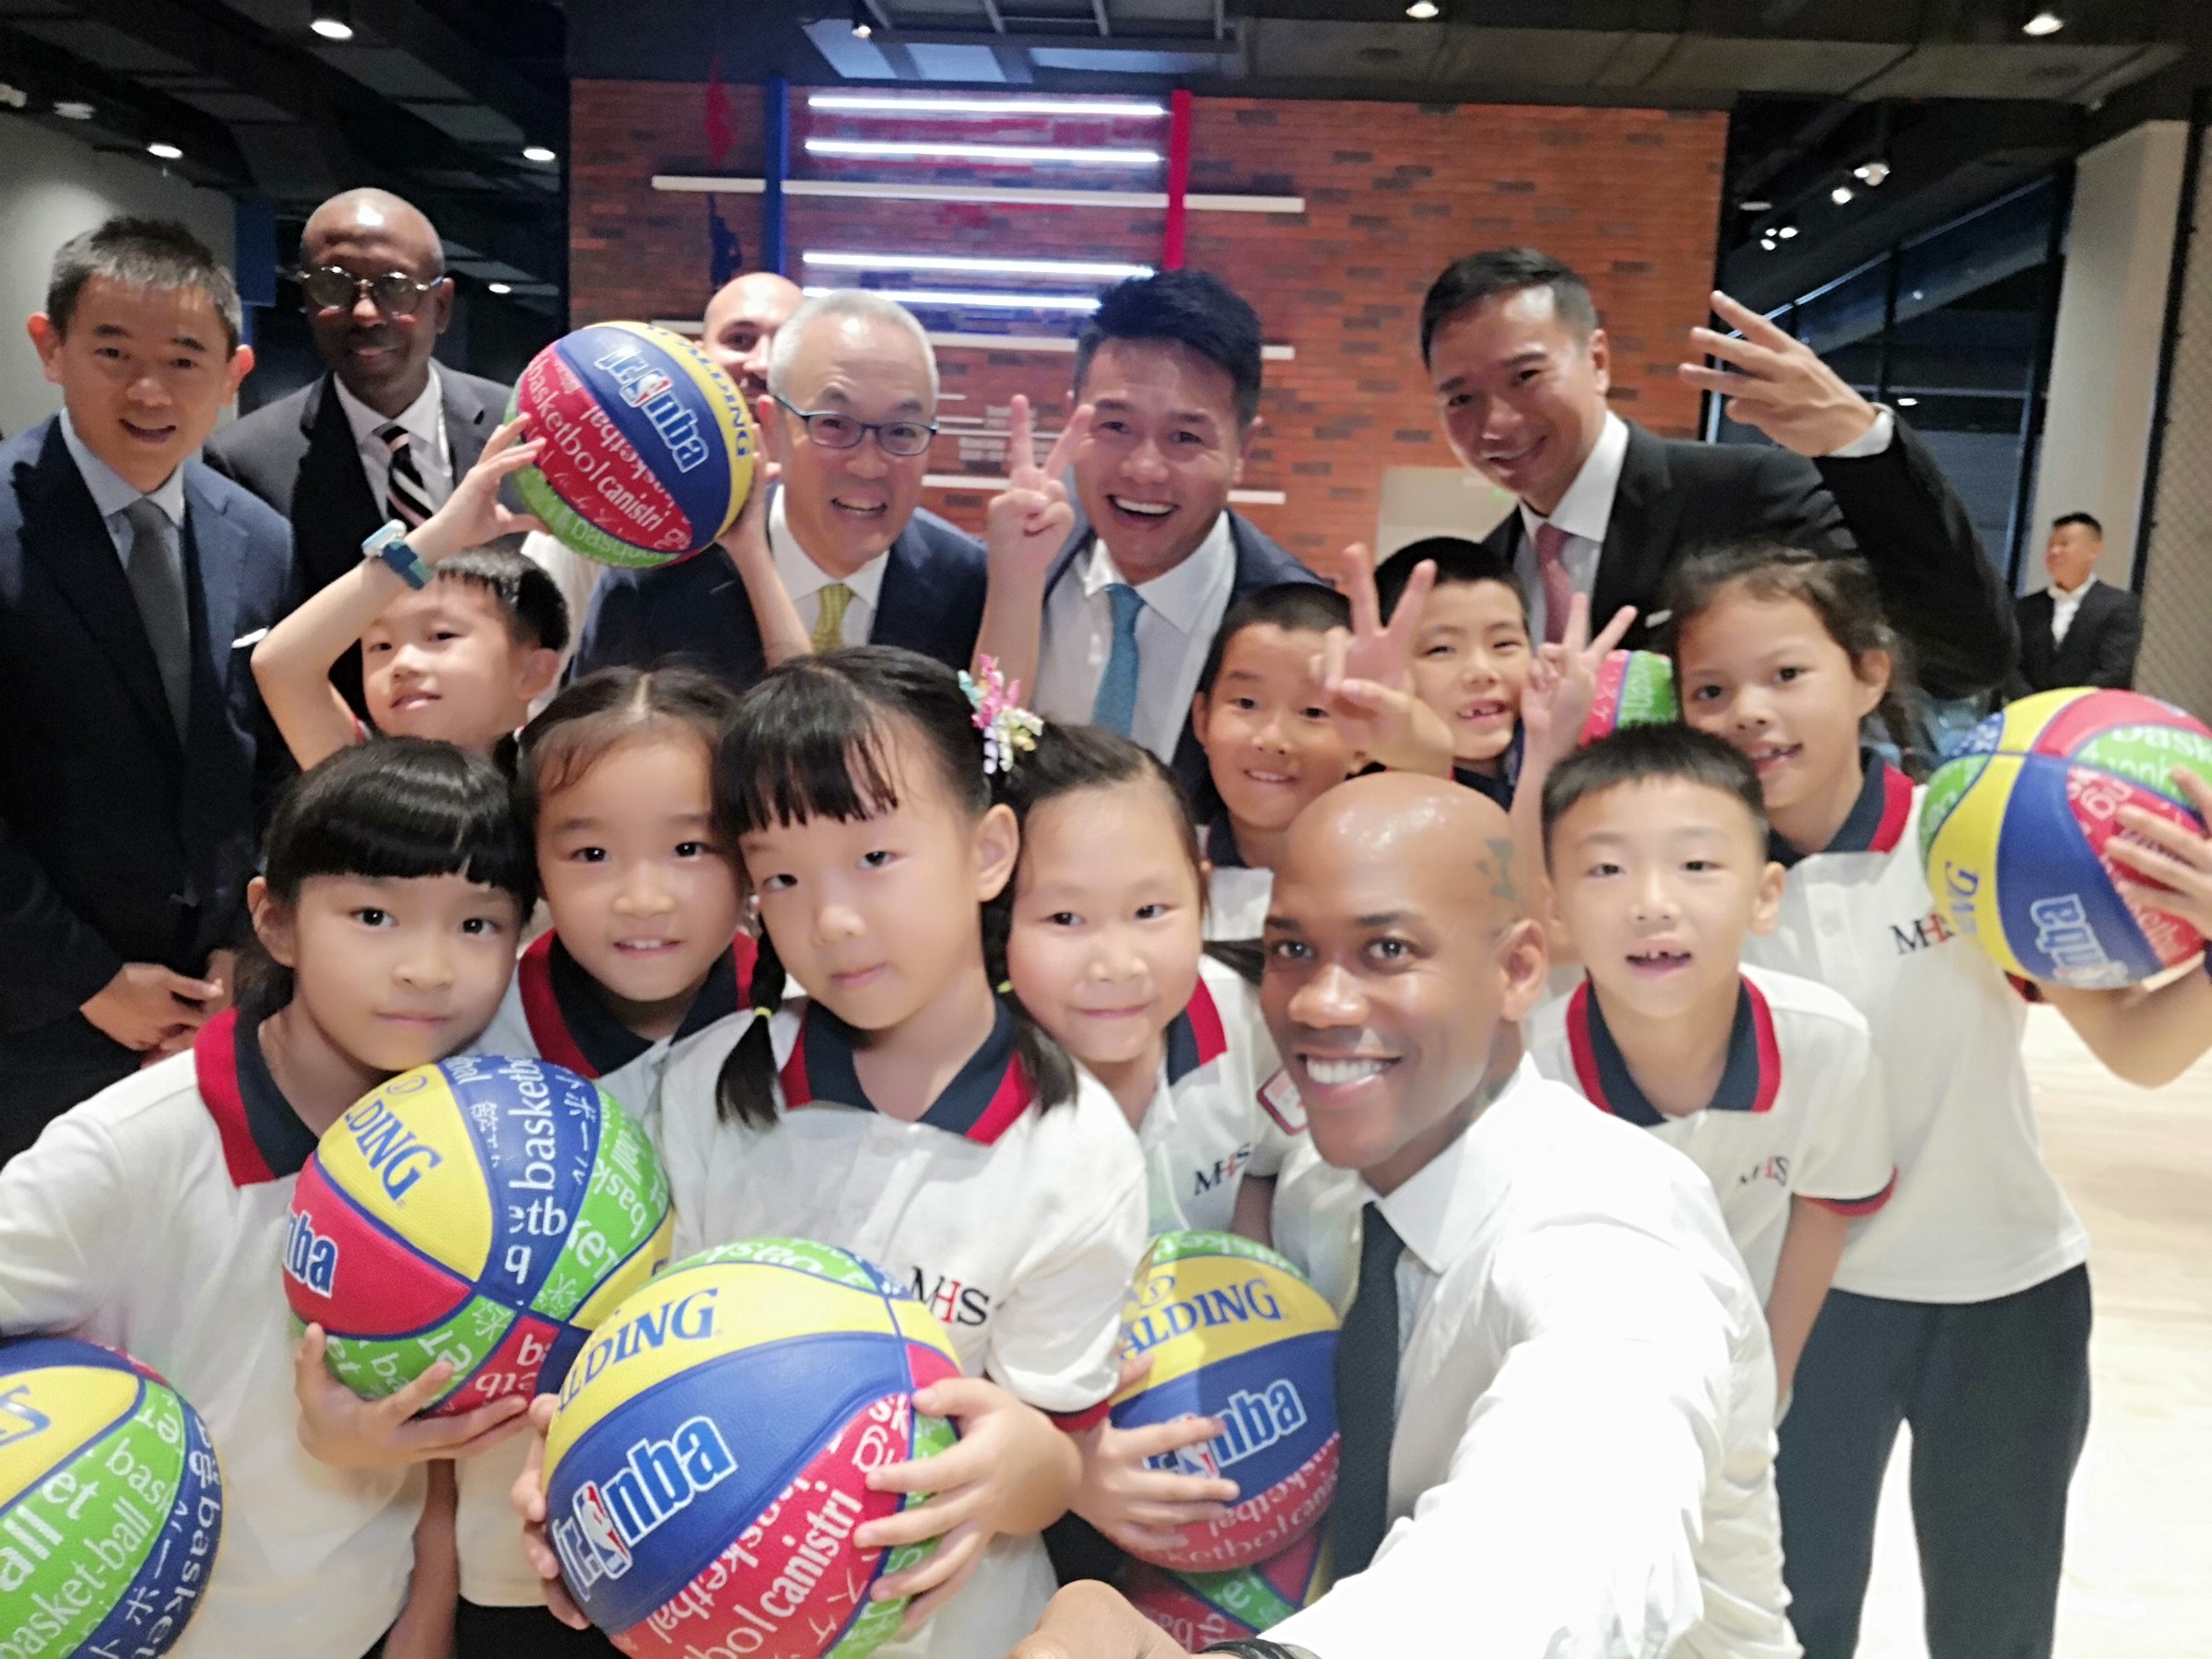 Photo 8 – Official opening of the NBA Exhibit at Mission Hills Haikou in Hainan, China